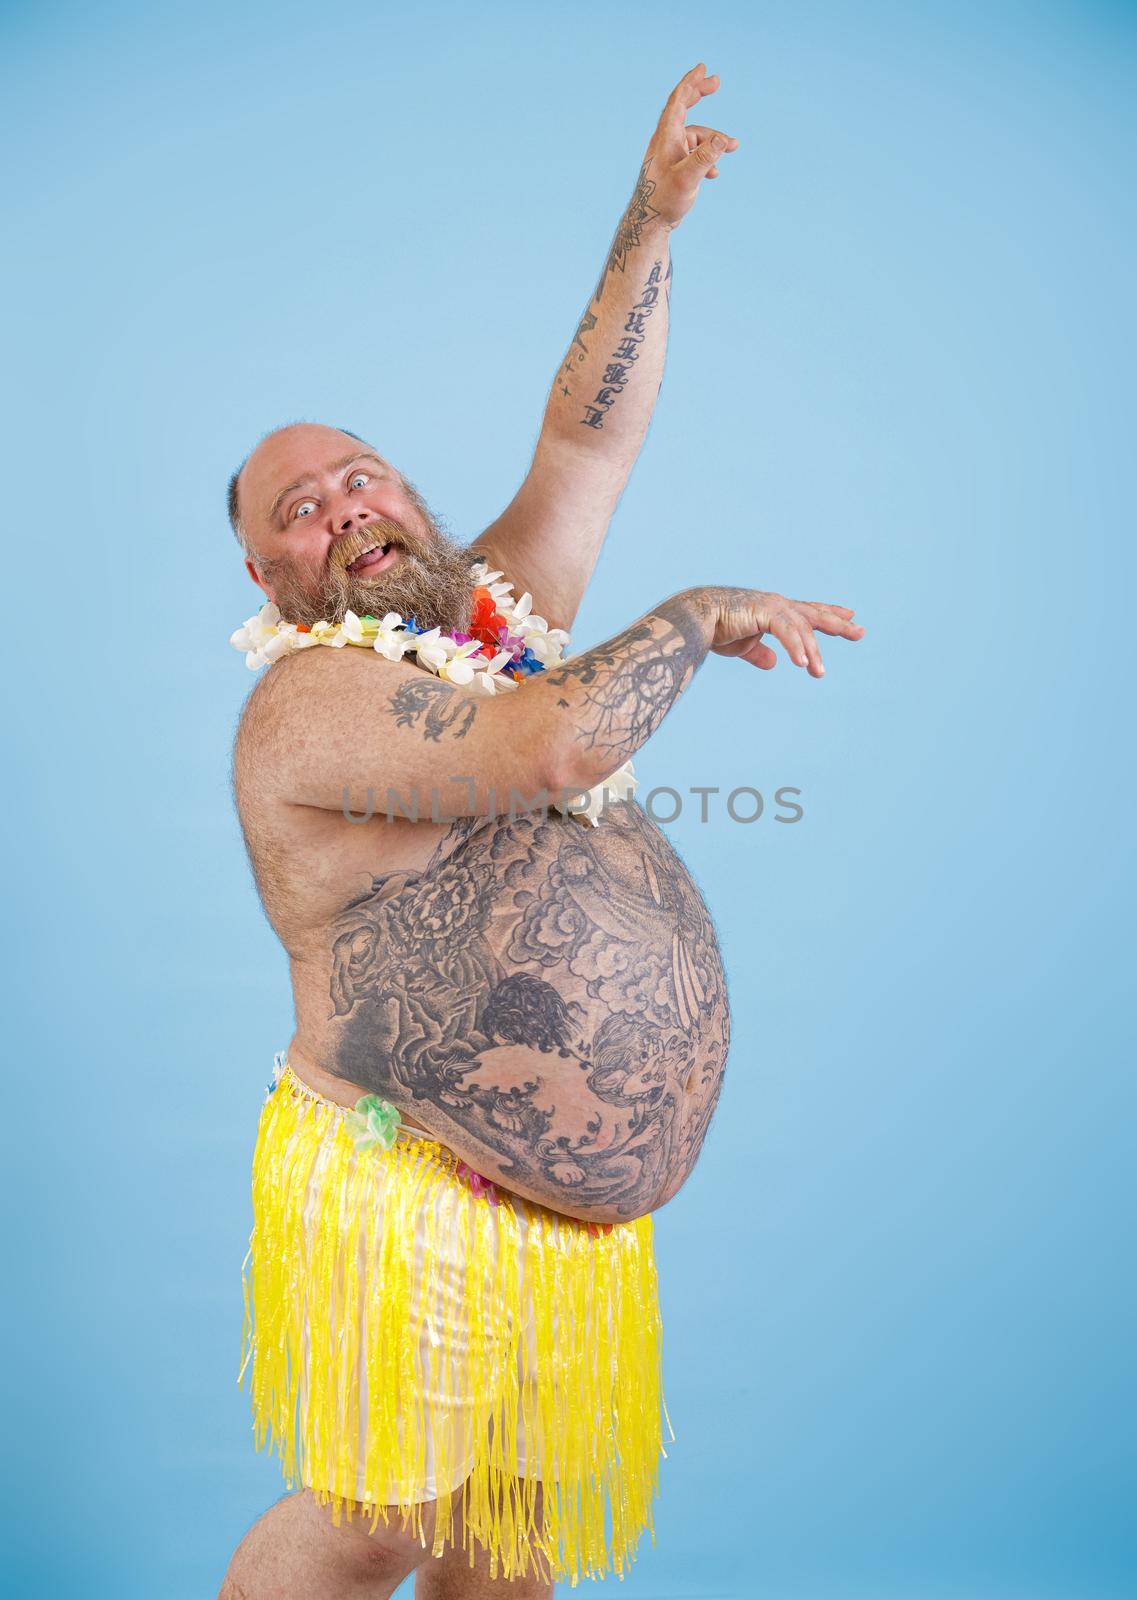 Funny expressive bearded obese man wearing decorative yellow grass skirt and flowers garland dances on light blue background in studio